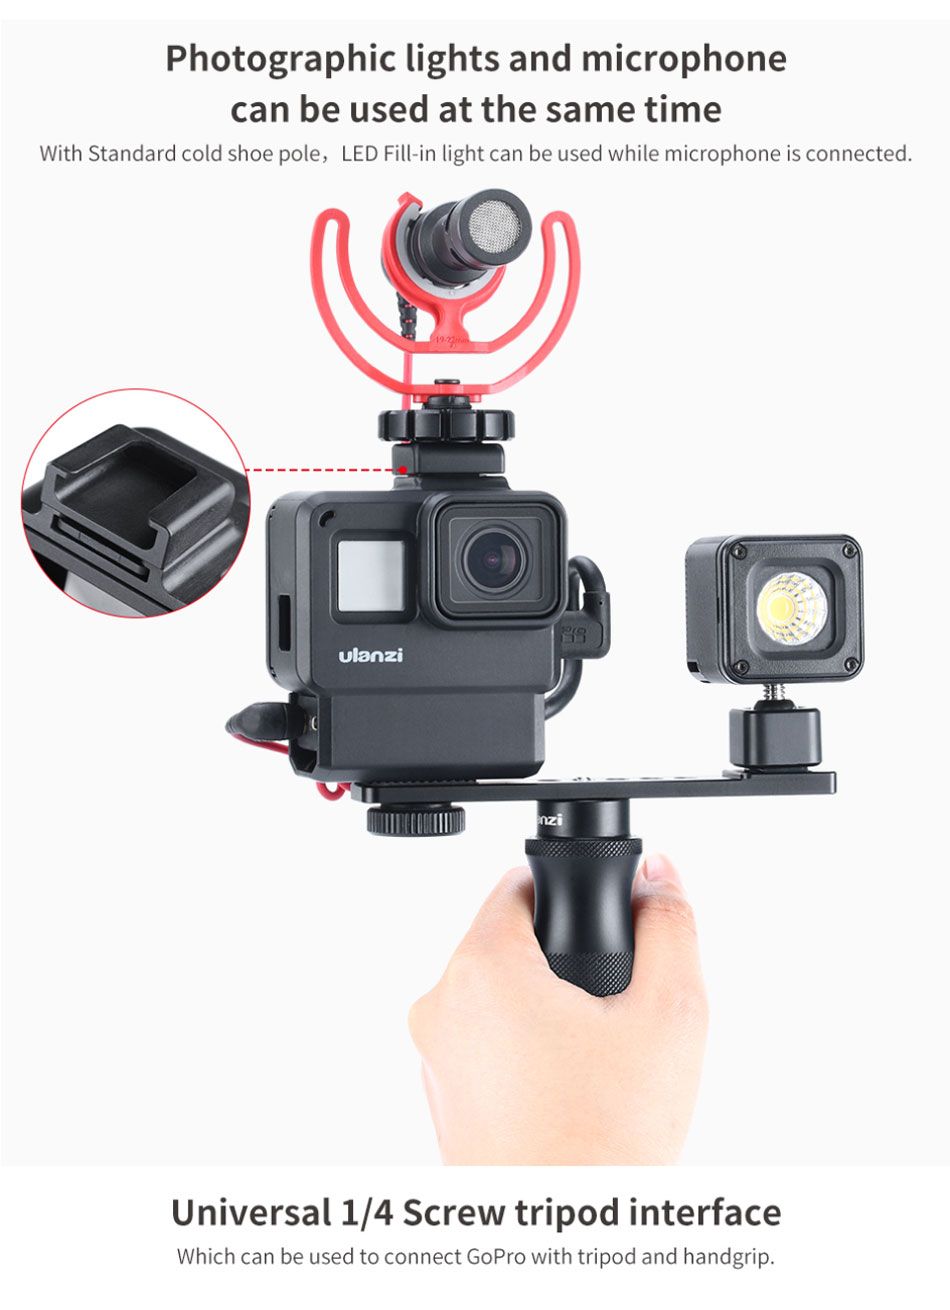 Ulanzi-V2-Pro-Vlog-Protective-Case-with-52mm-Filter-Mic-Adapter-Lens-Cover-Vlogging-Cage-for-Gopro-7-1522186